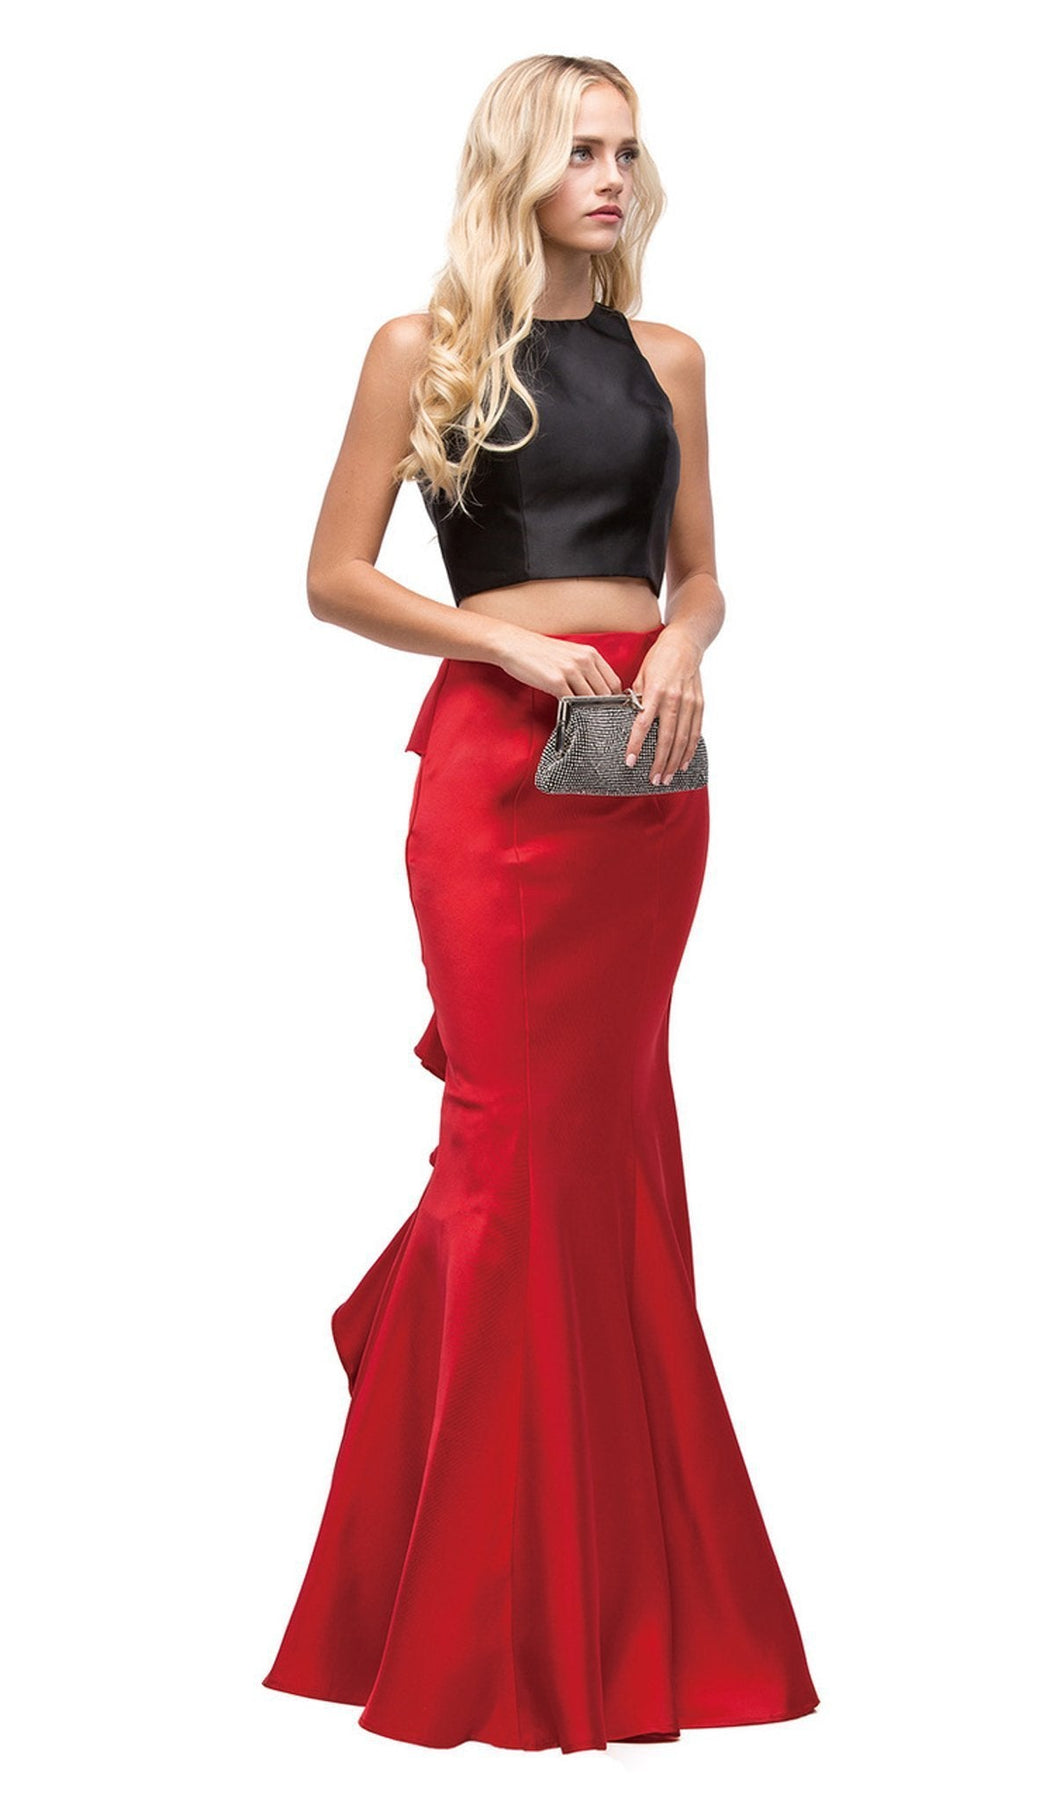 Dancing Queen - 9767 Two Piece Trumpet Silhouette Prom Dress with Ruffled Back Special Occasion Dress XS / Blk/Red